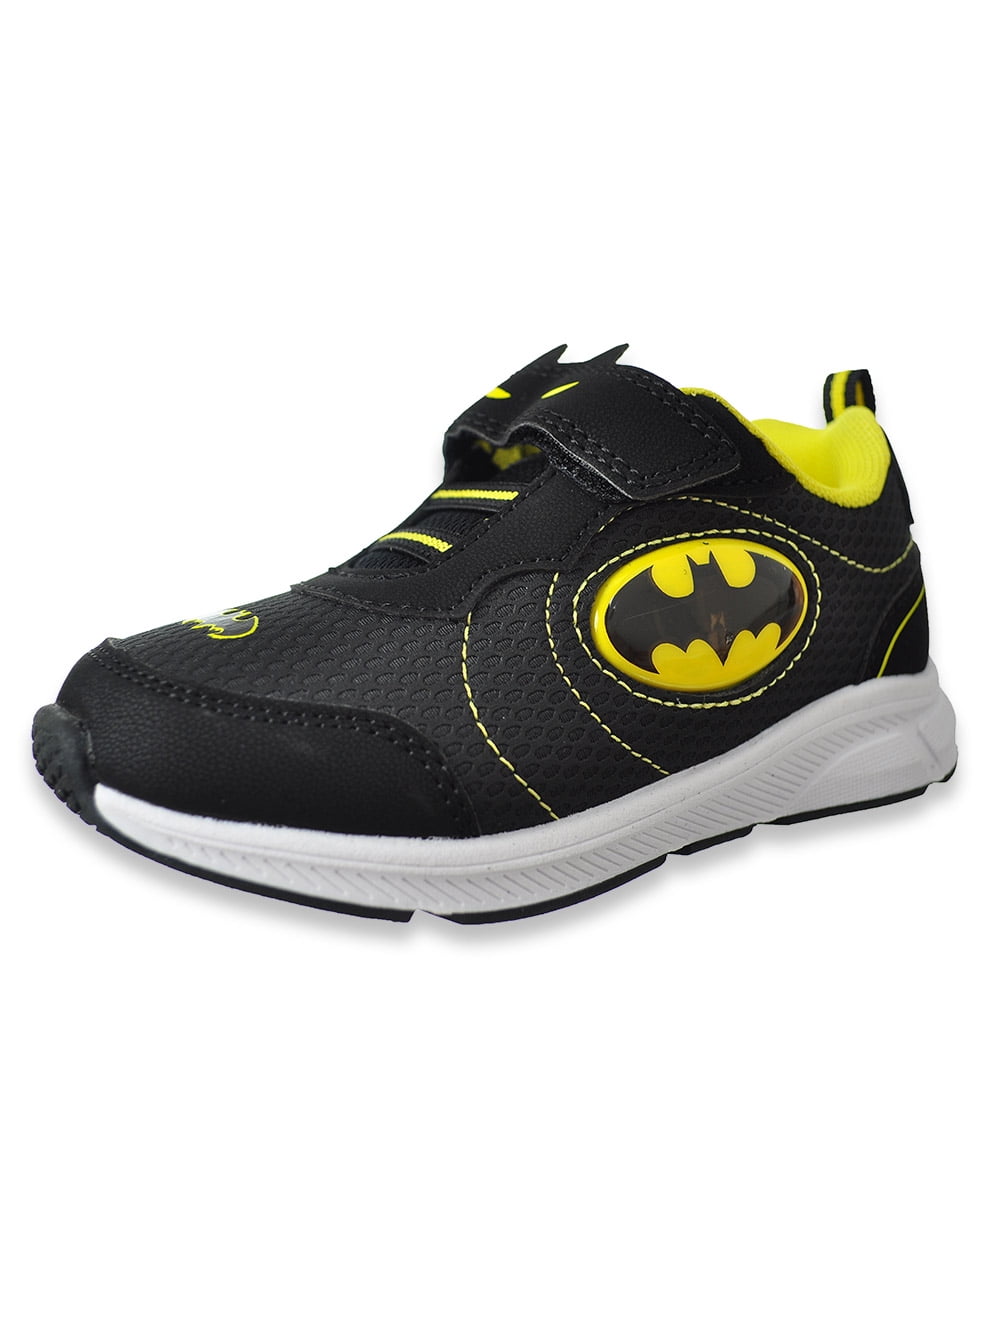 **NEW BOYS DC COMICS BATMAN HIGH-TOP SNEAKERS ATHLETIC CASUAL SHOES TODDLER 